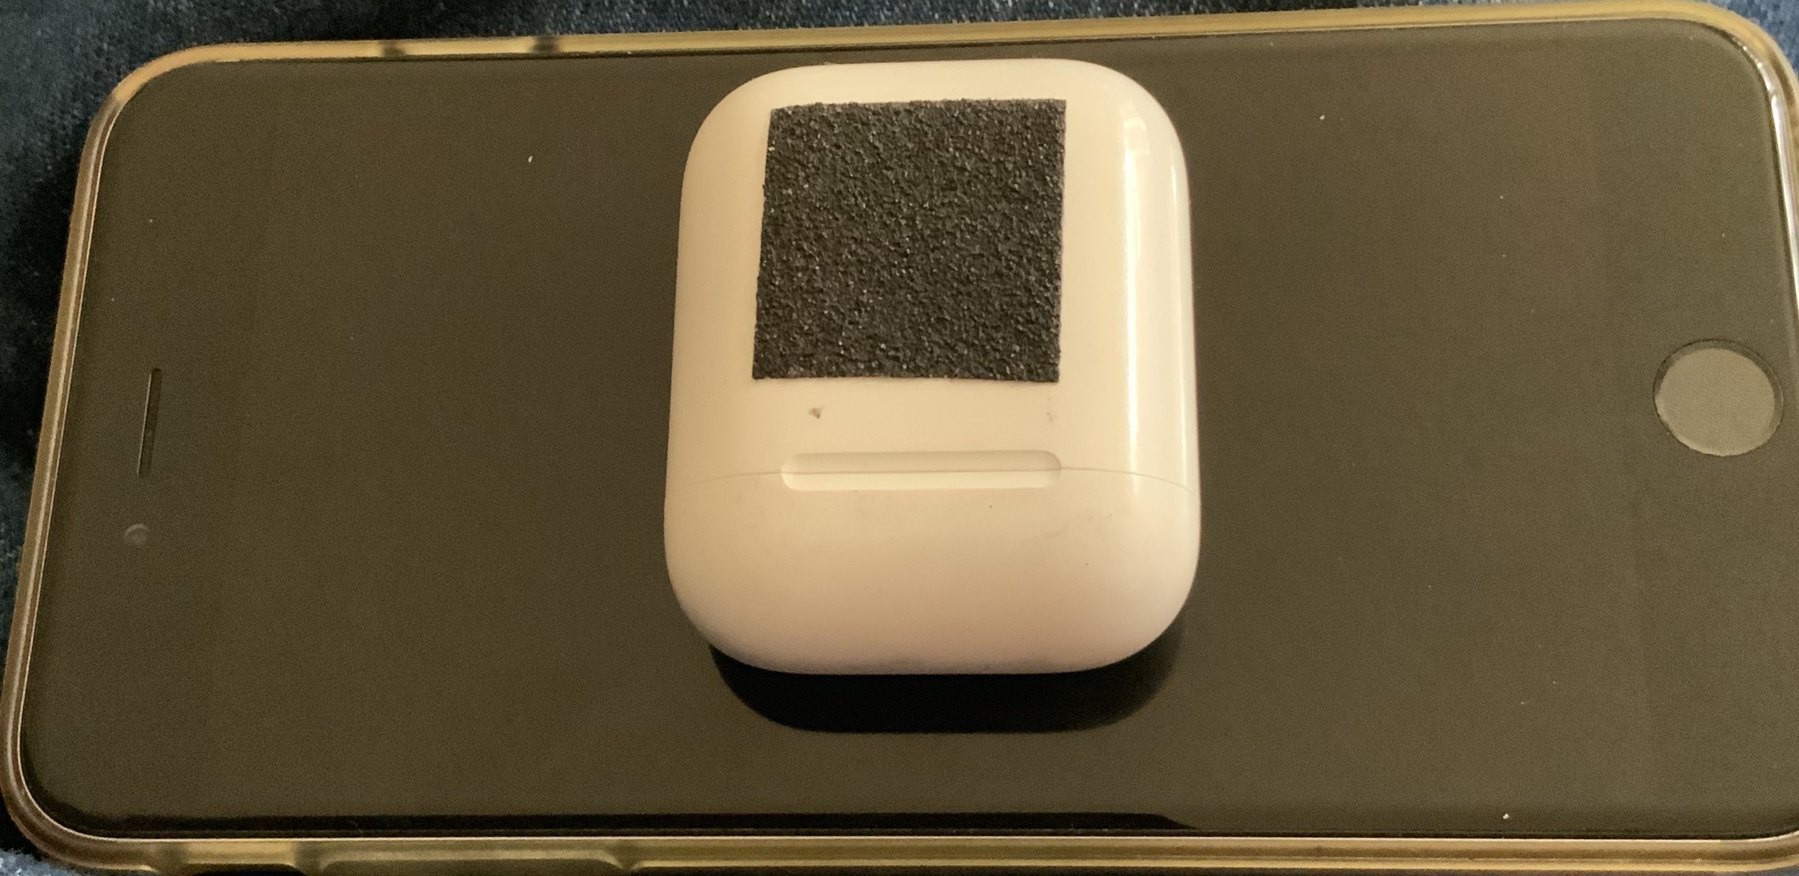 Stair edge nonslip tape on Airpods case